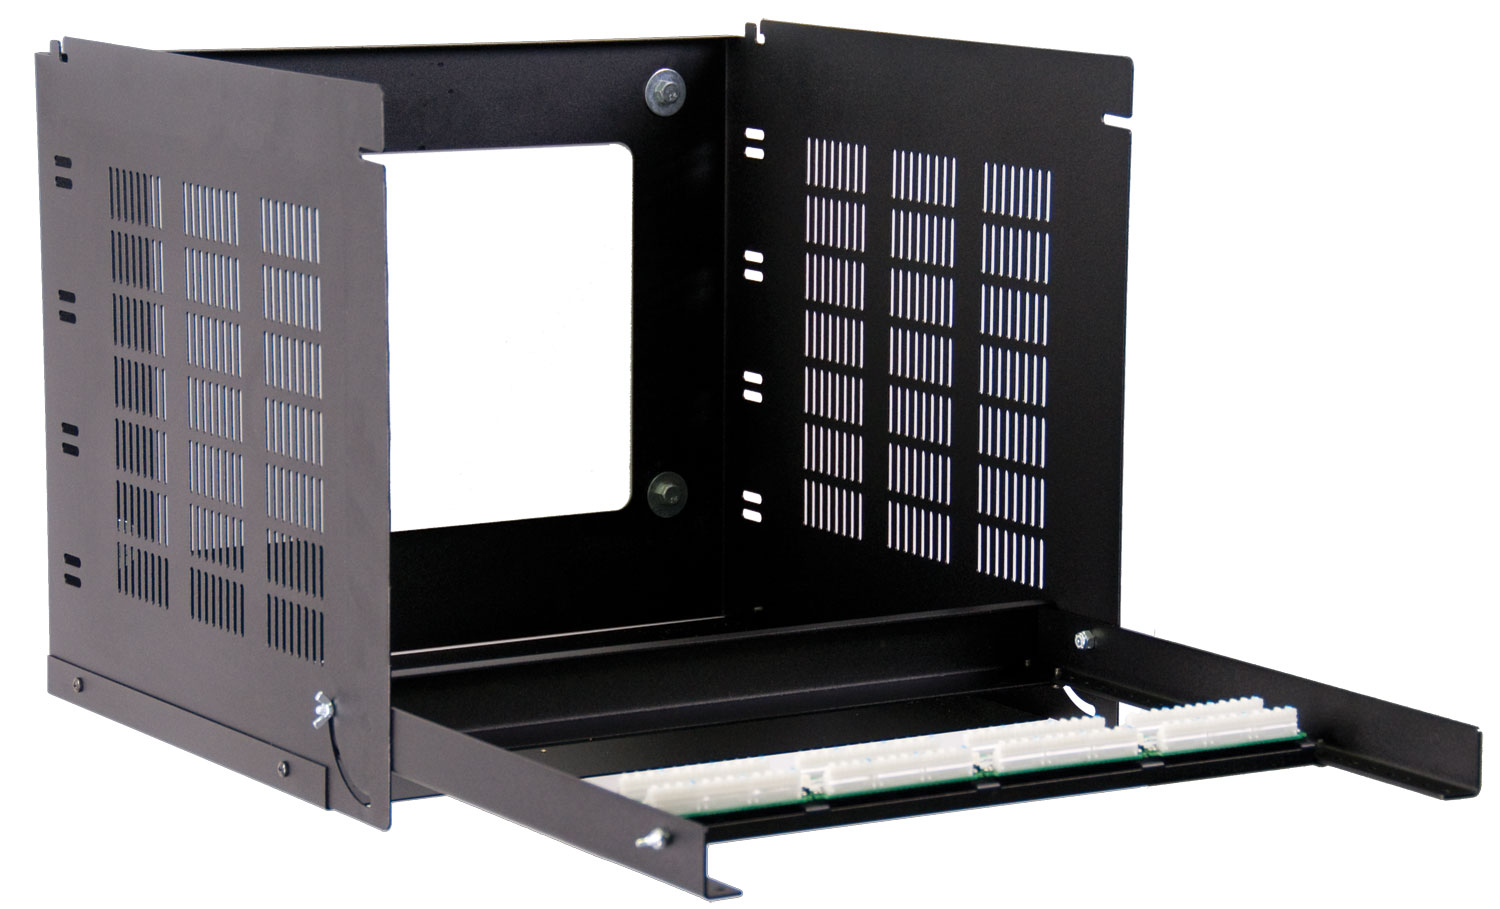 Great_Lakes_Case__Cabinet-_Wall_Mount_Boxes,_Racks_And_Panel_Mounts_For_Small_Networks_1